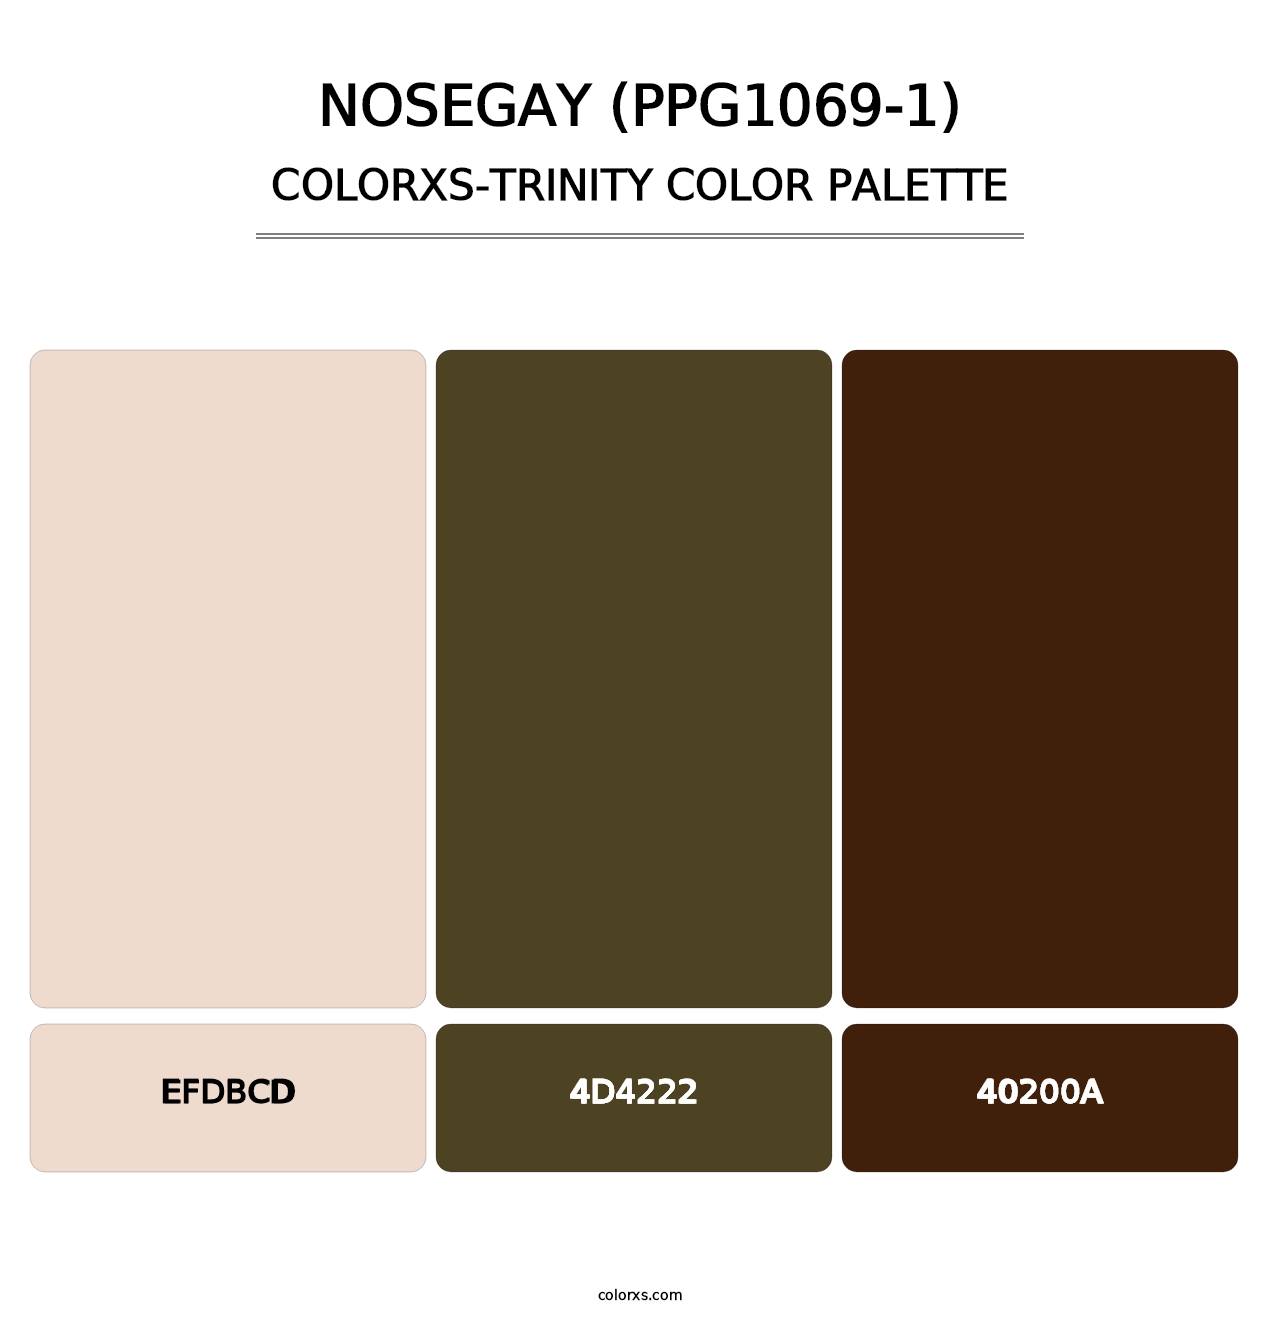 Nosegay (PPG1069-1) - Colorxs Trinity Palette